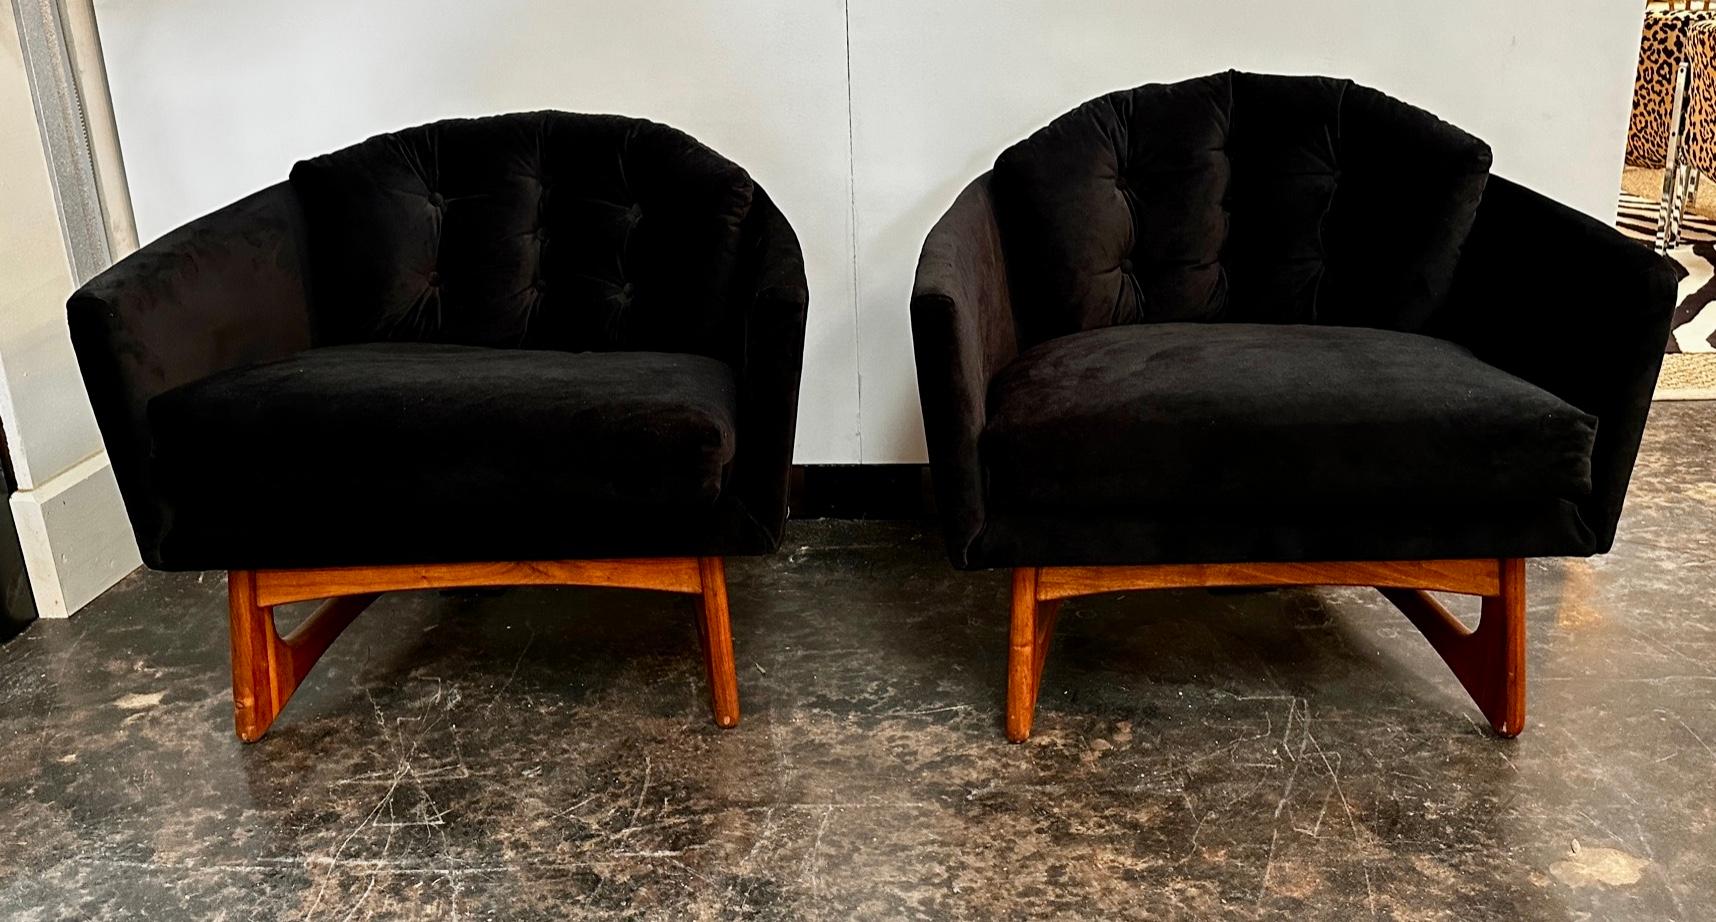 A pair of low, wide barrel chairs supported by a sculpted walnut open frame base. Made by Craft and Associates by Adrian Pearsall. The chairs have been recovered in a beautiful black velvet  and are ready to use.